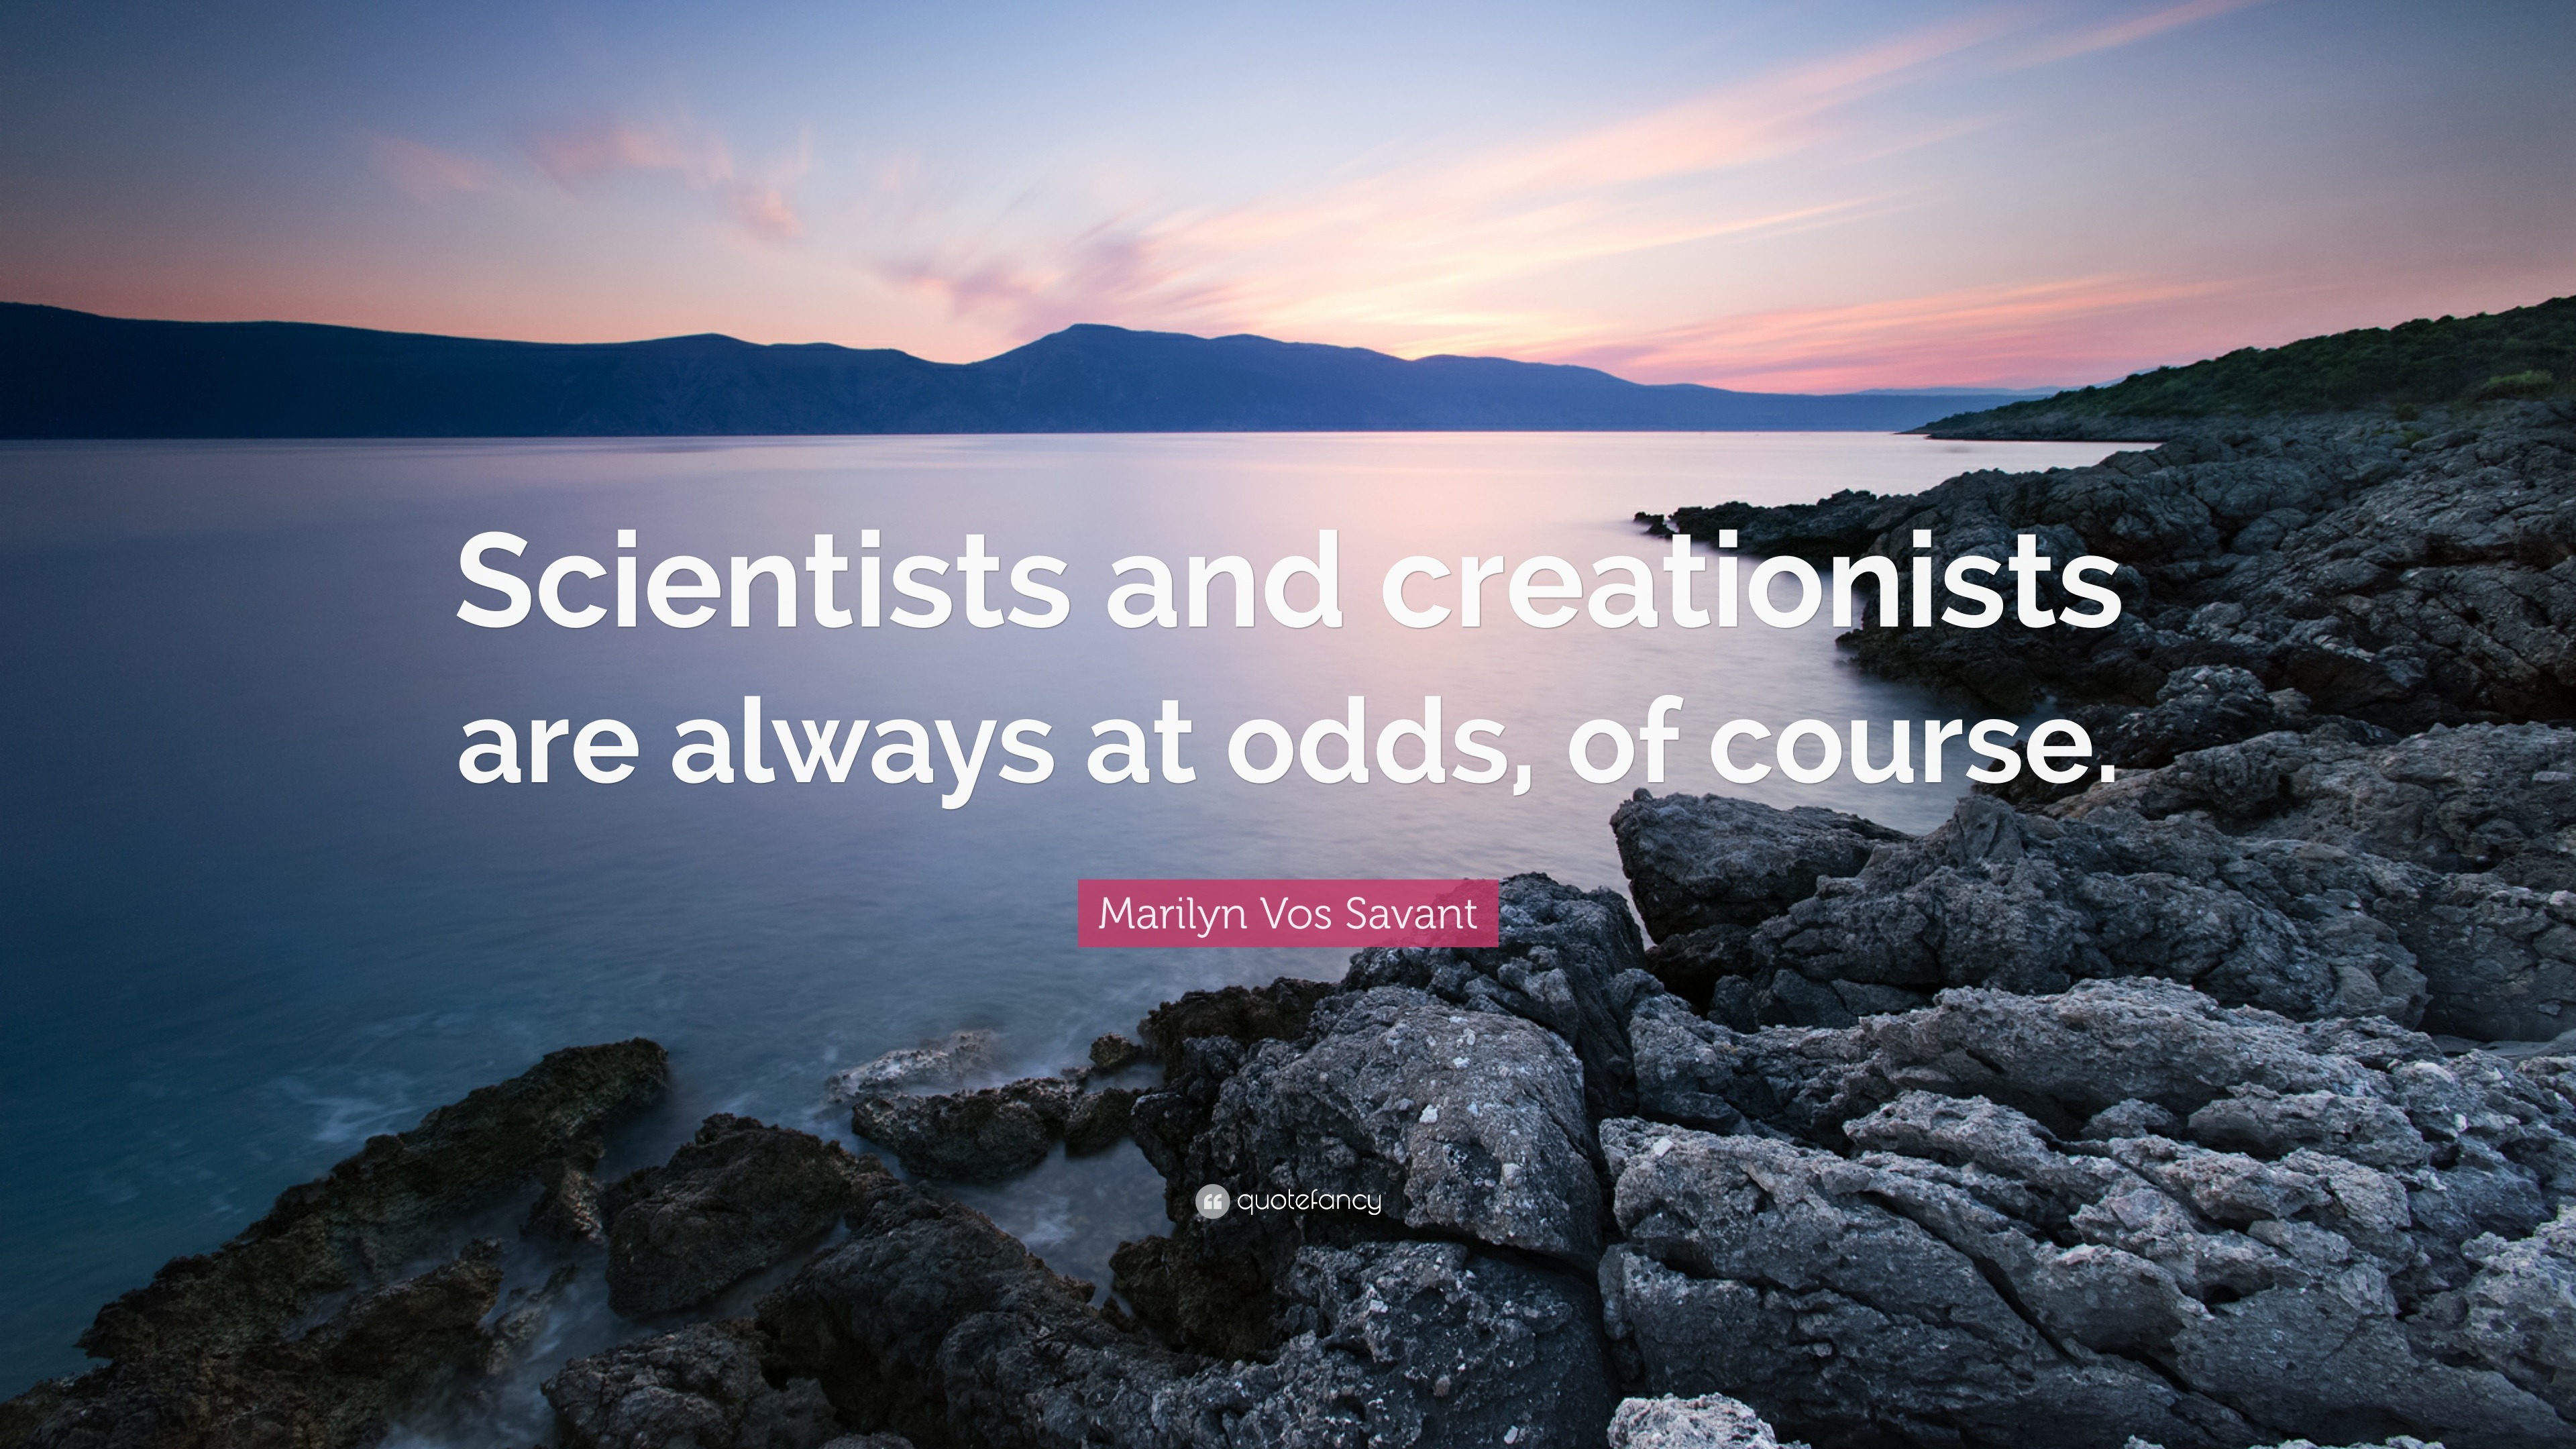 Marilyn vos Savant  Quotes about english language, Wisdom quotes